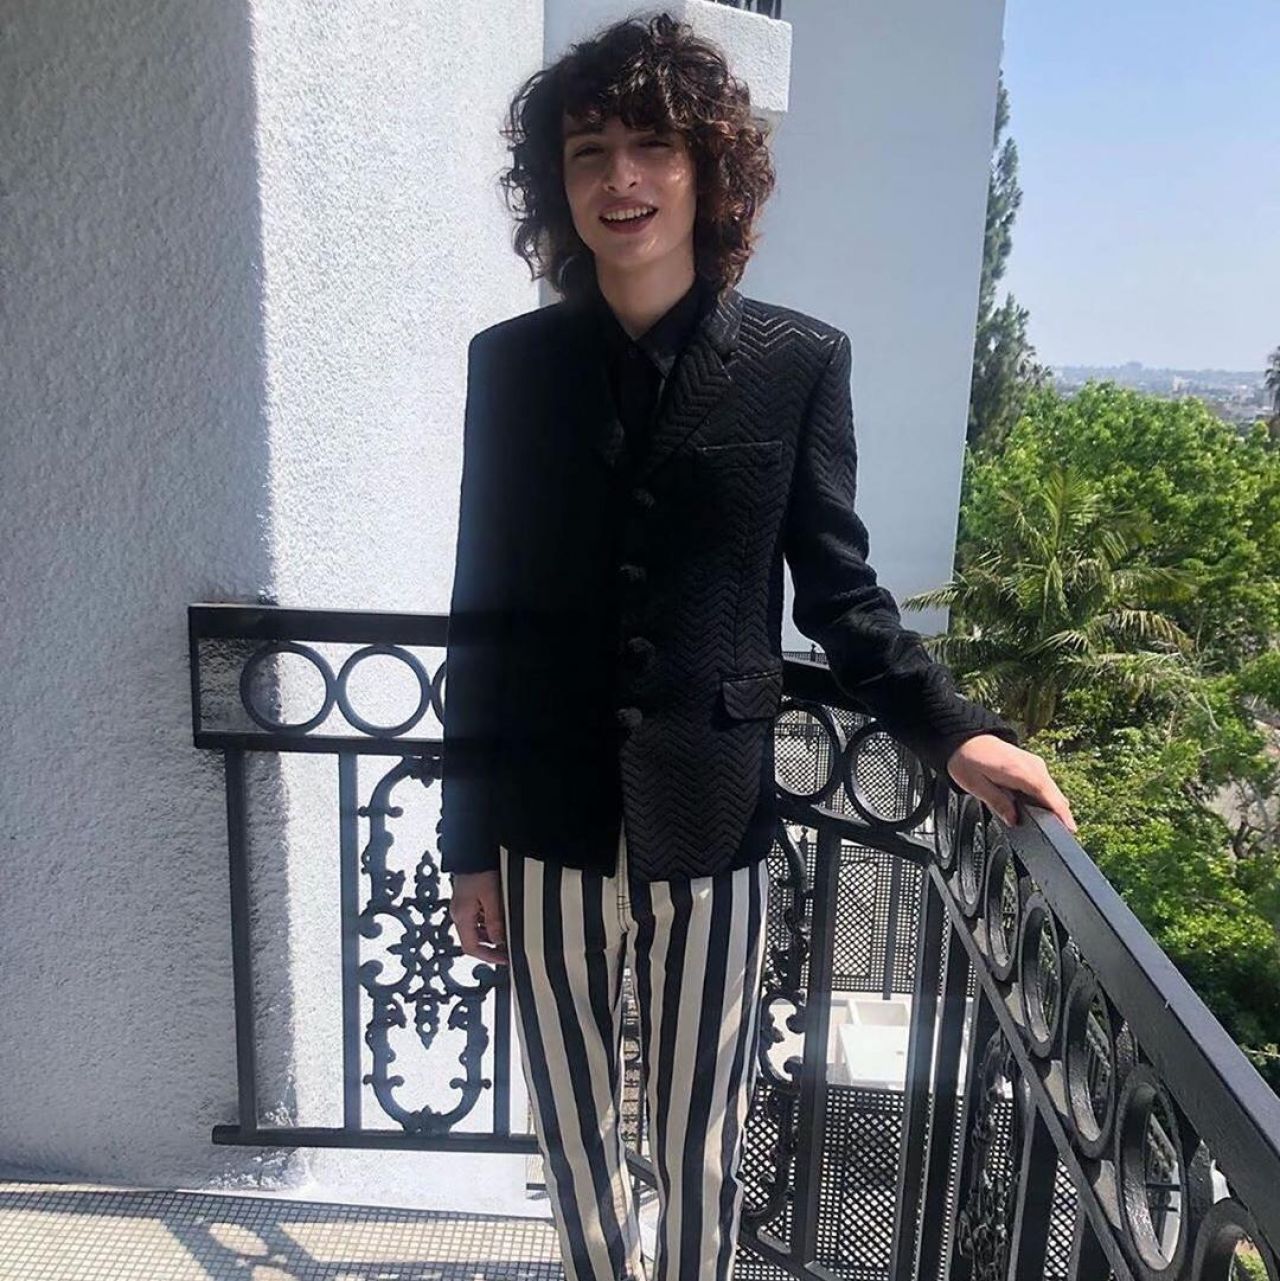 The pants have black and white stripes worn by Finn Wolfhard (Stranger ...